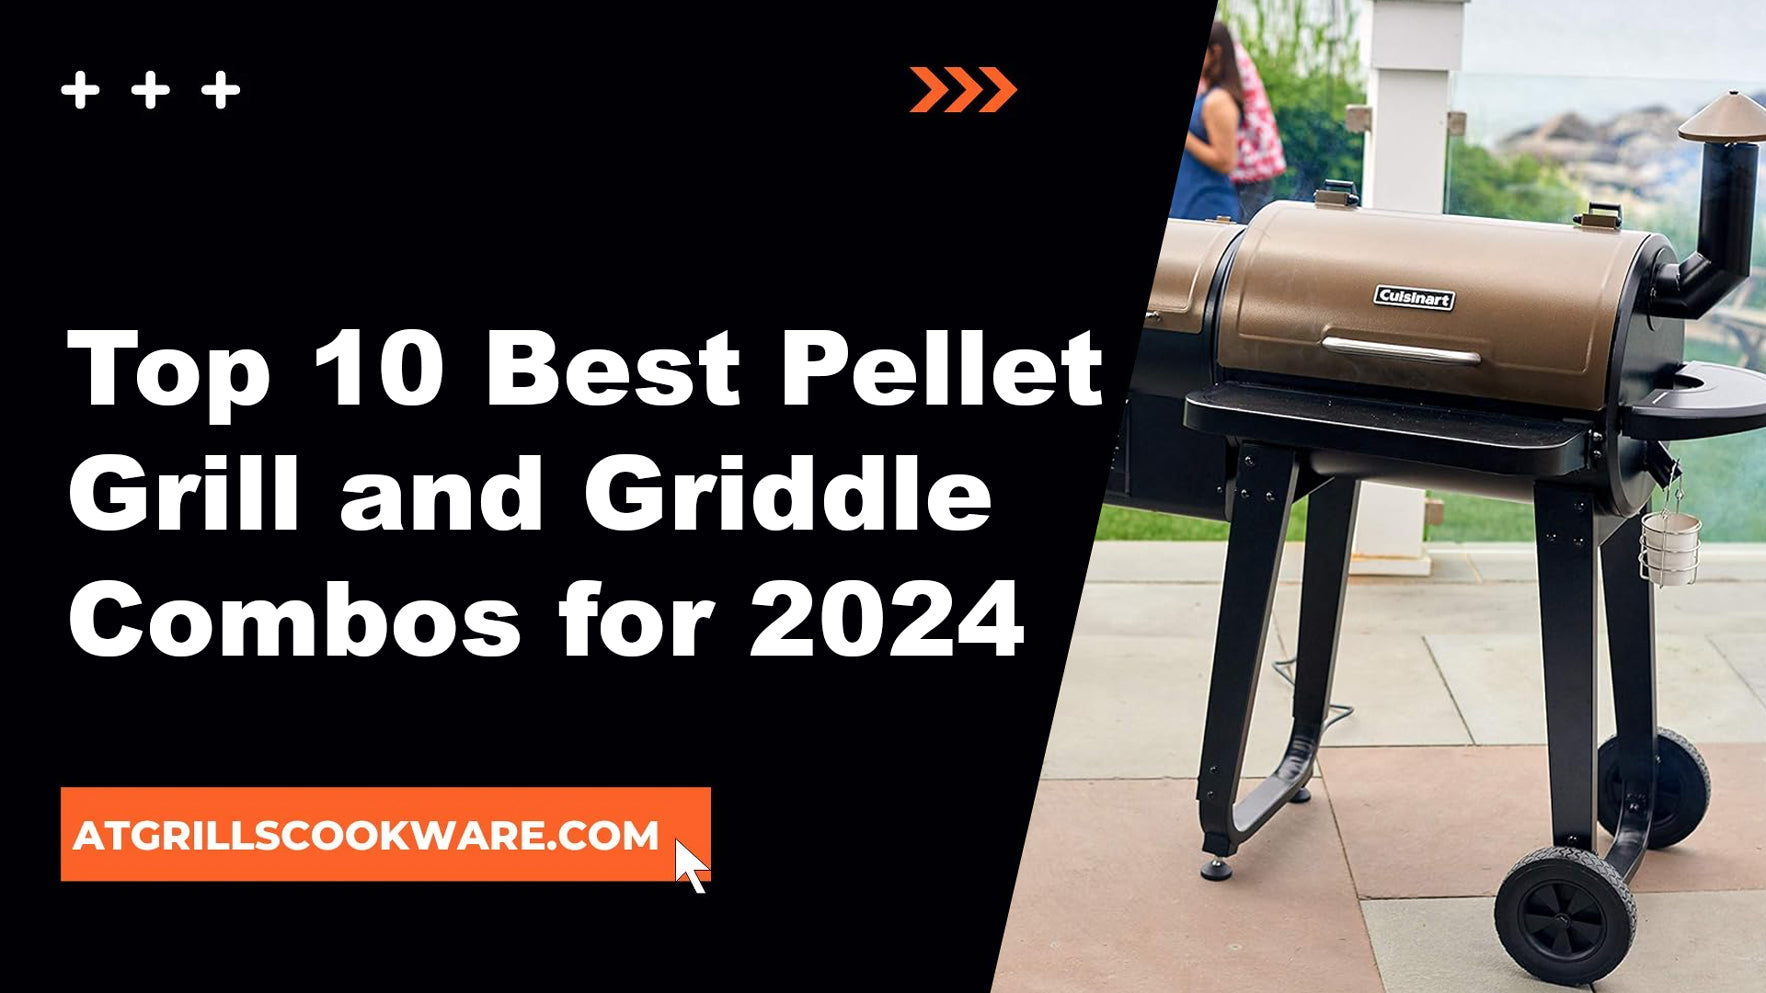 Sizzle and Smoke: Top 10 Best Pellet Grill and Griddle Combos for 2024